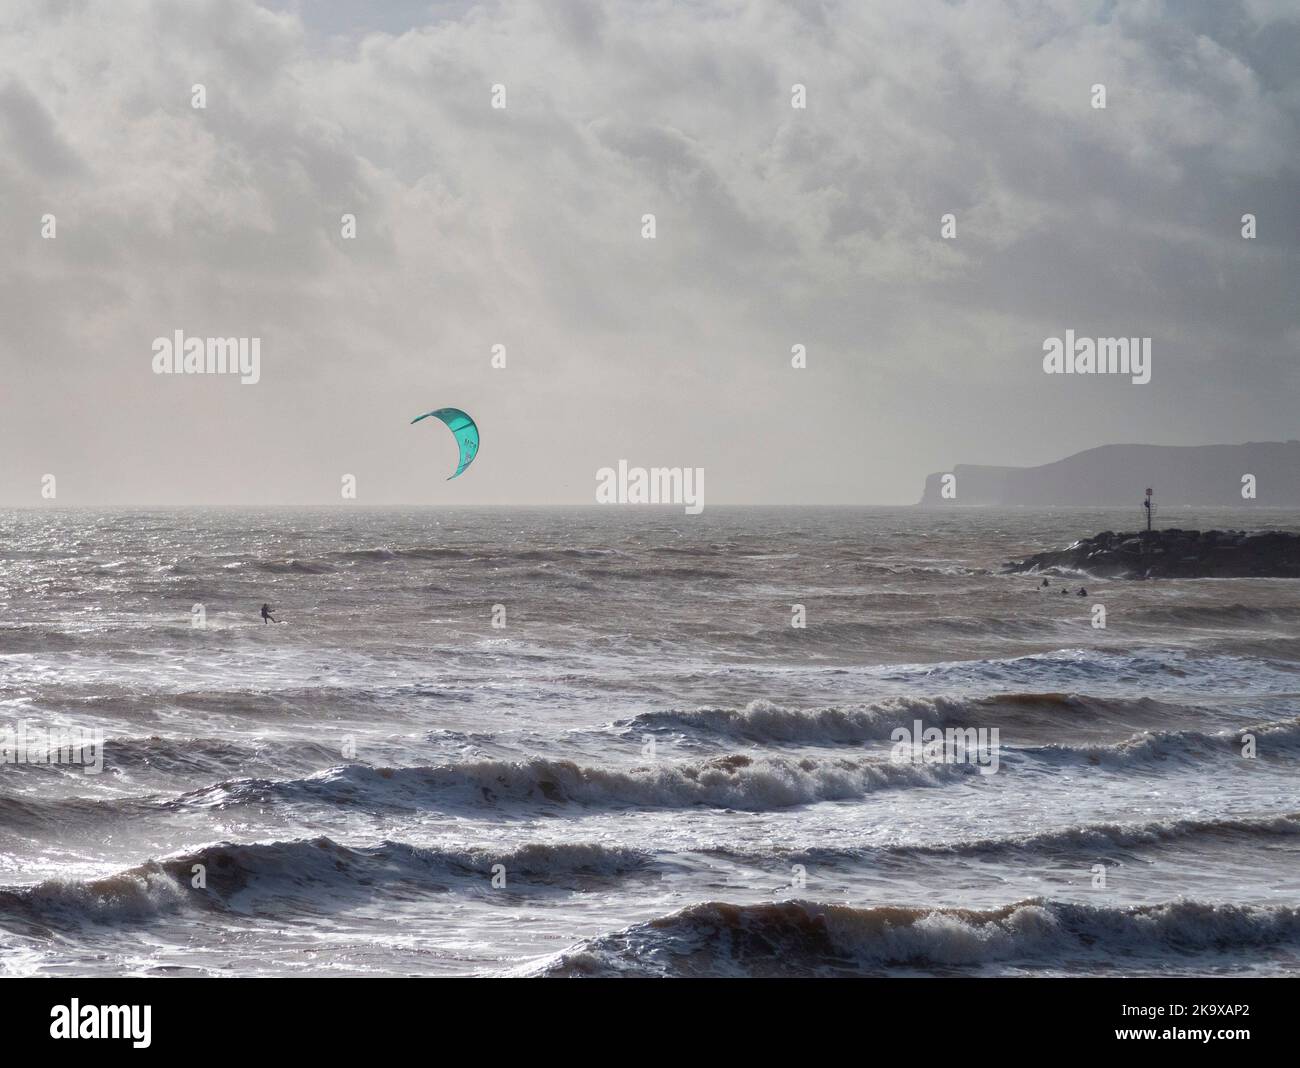 Sidmouth, Devon, 30th Oct 2022 Strong winds found excellent conditions for wind surfers at Sidmouth in Devon today. Tony Charnock/Alamy Live News Stock Photo